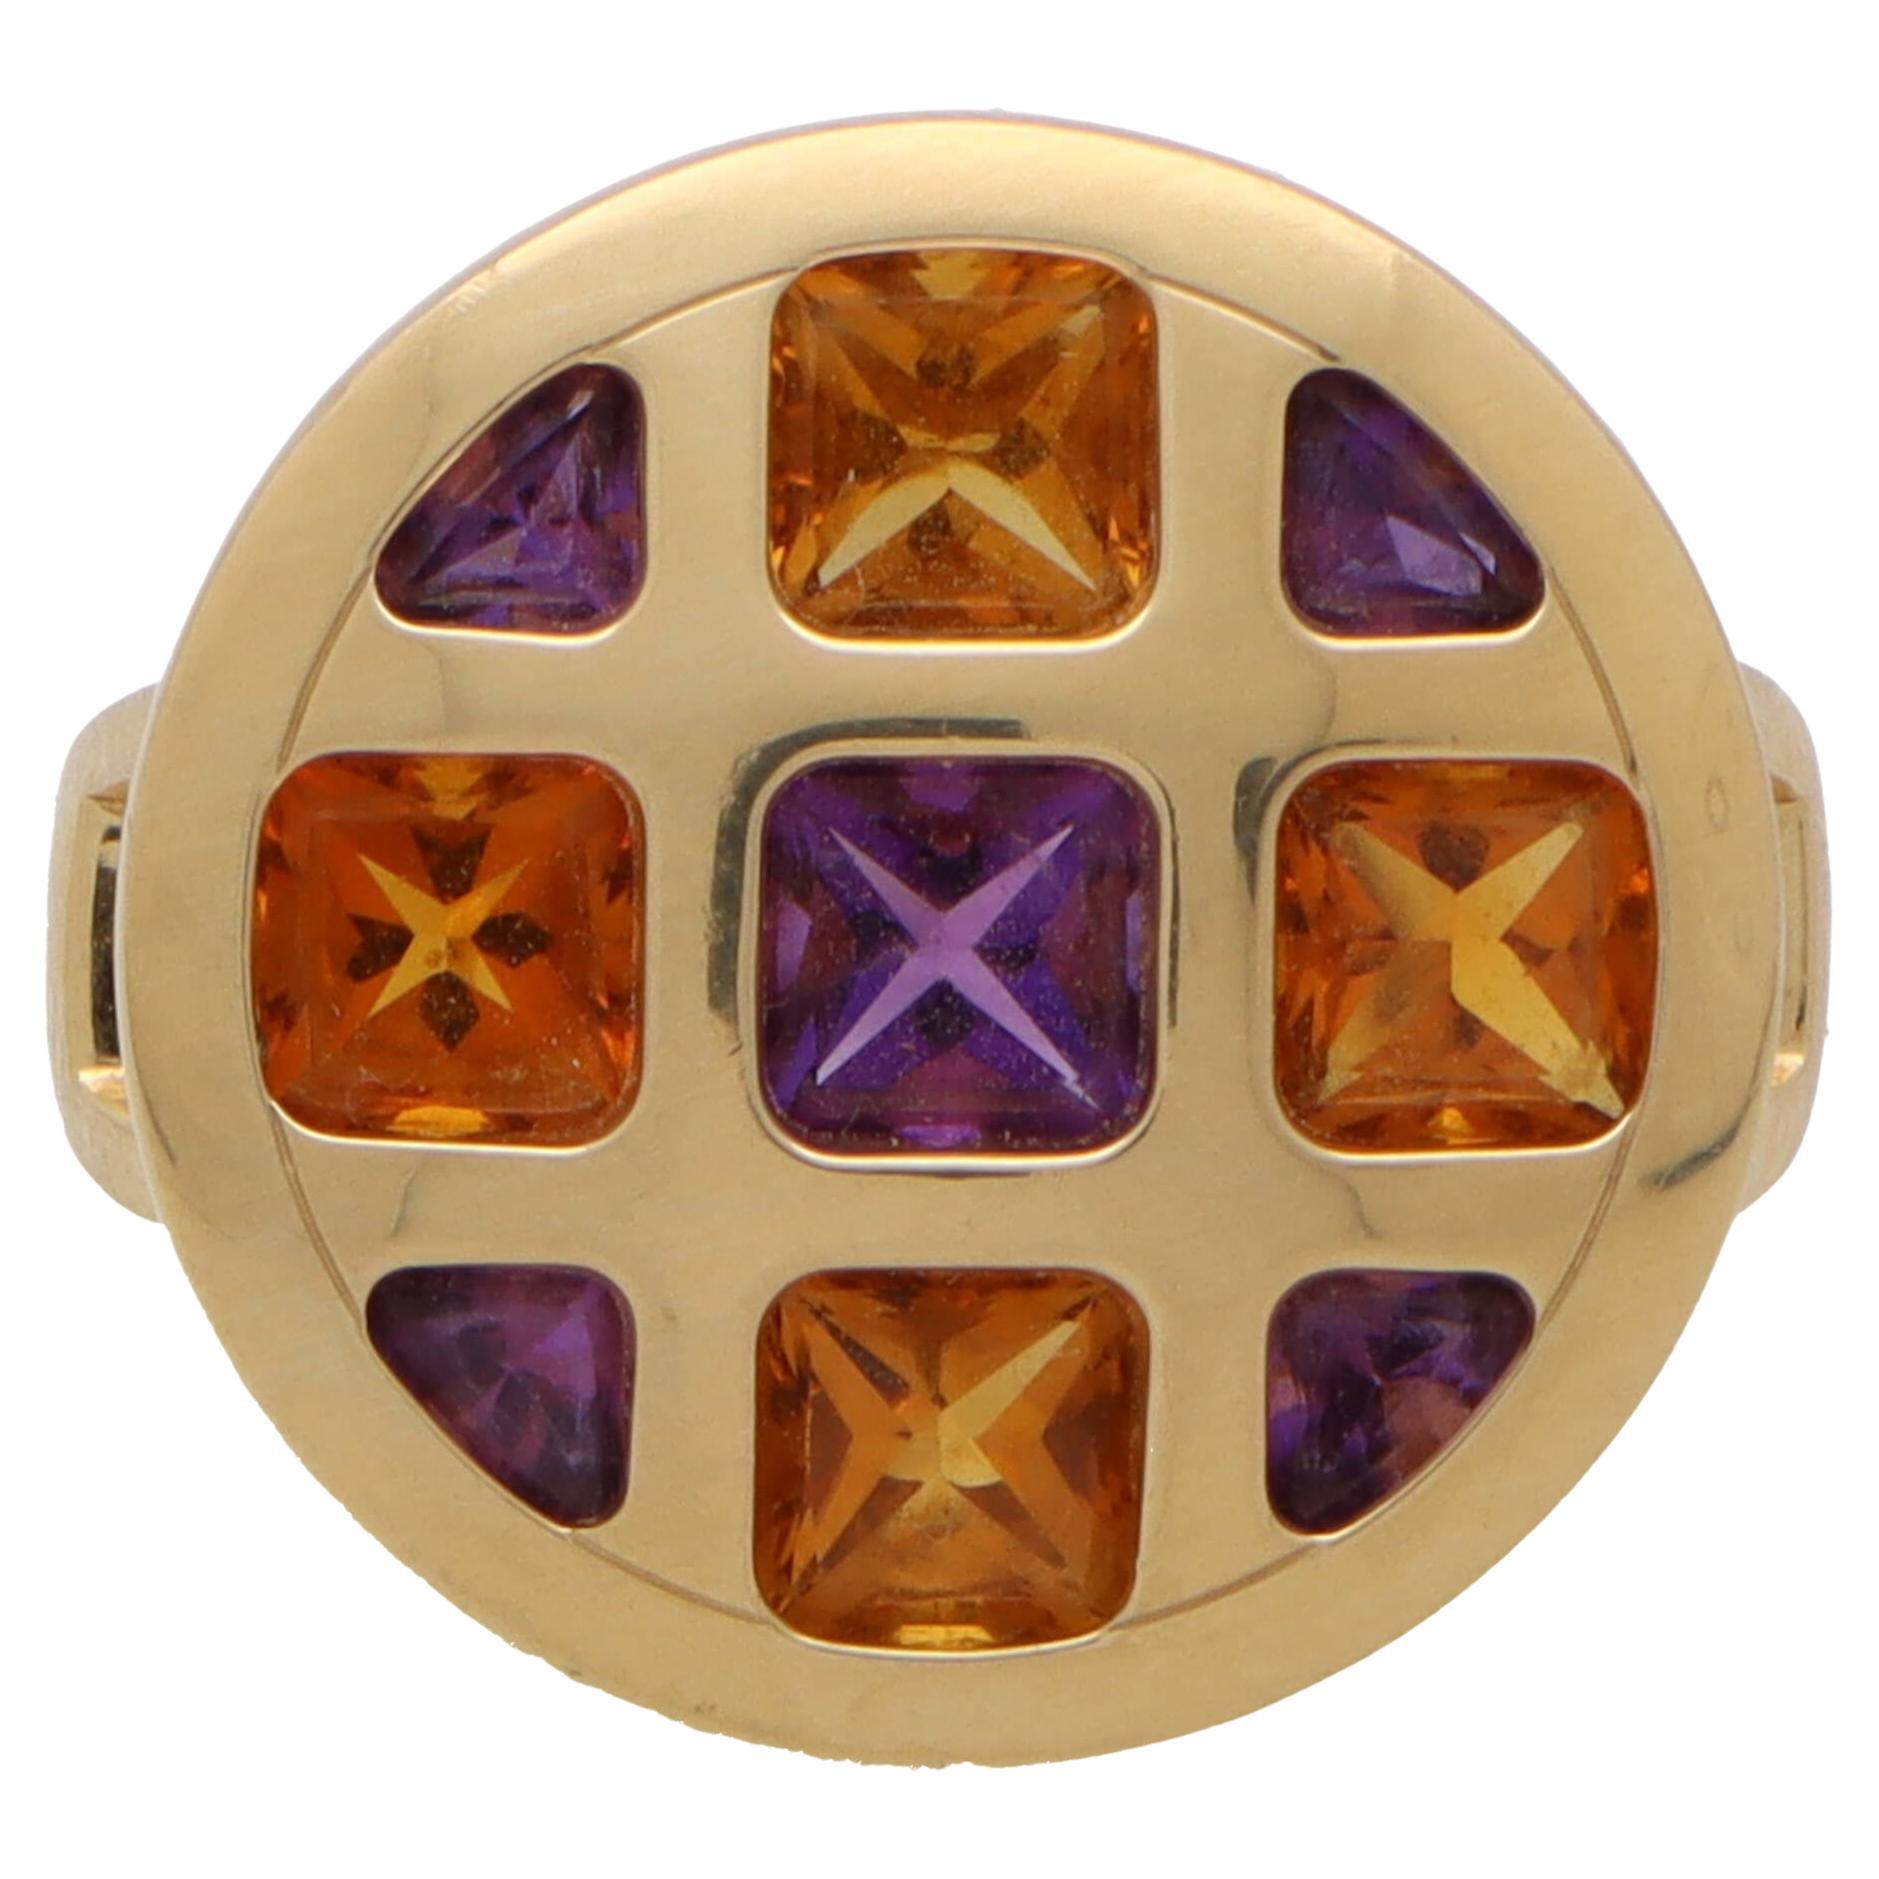  Vintage Cartier Pasha Amethyst and Citrine Ring in 18k Yellow Gold